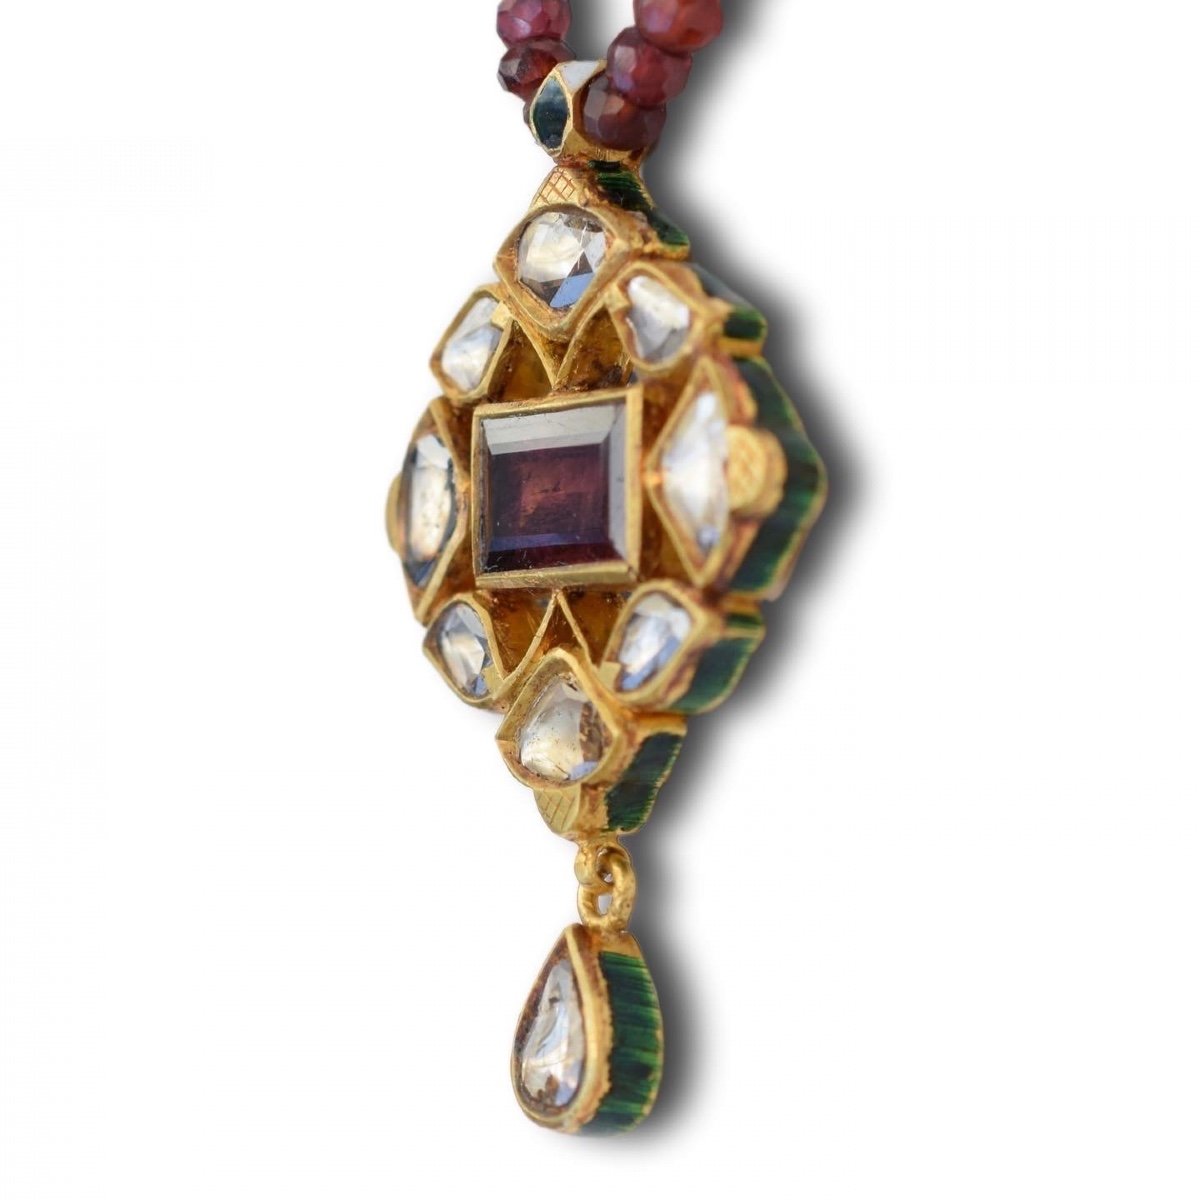 Enamel And Gold Pendant With Diamonds And A Table Cut Garnet. Indian, Circa 1900-photo-7